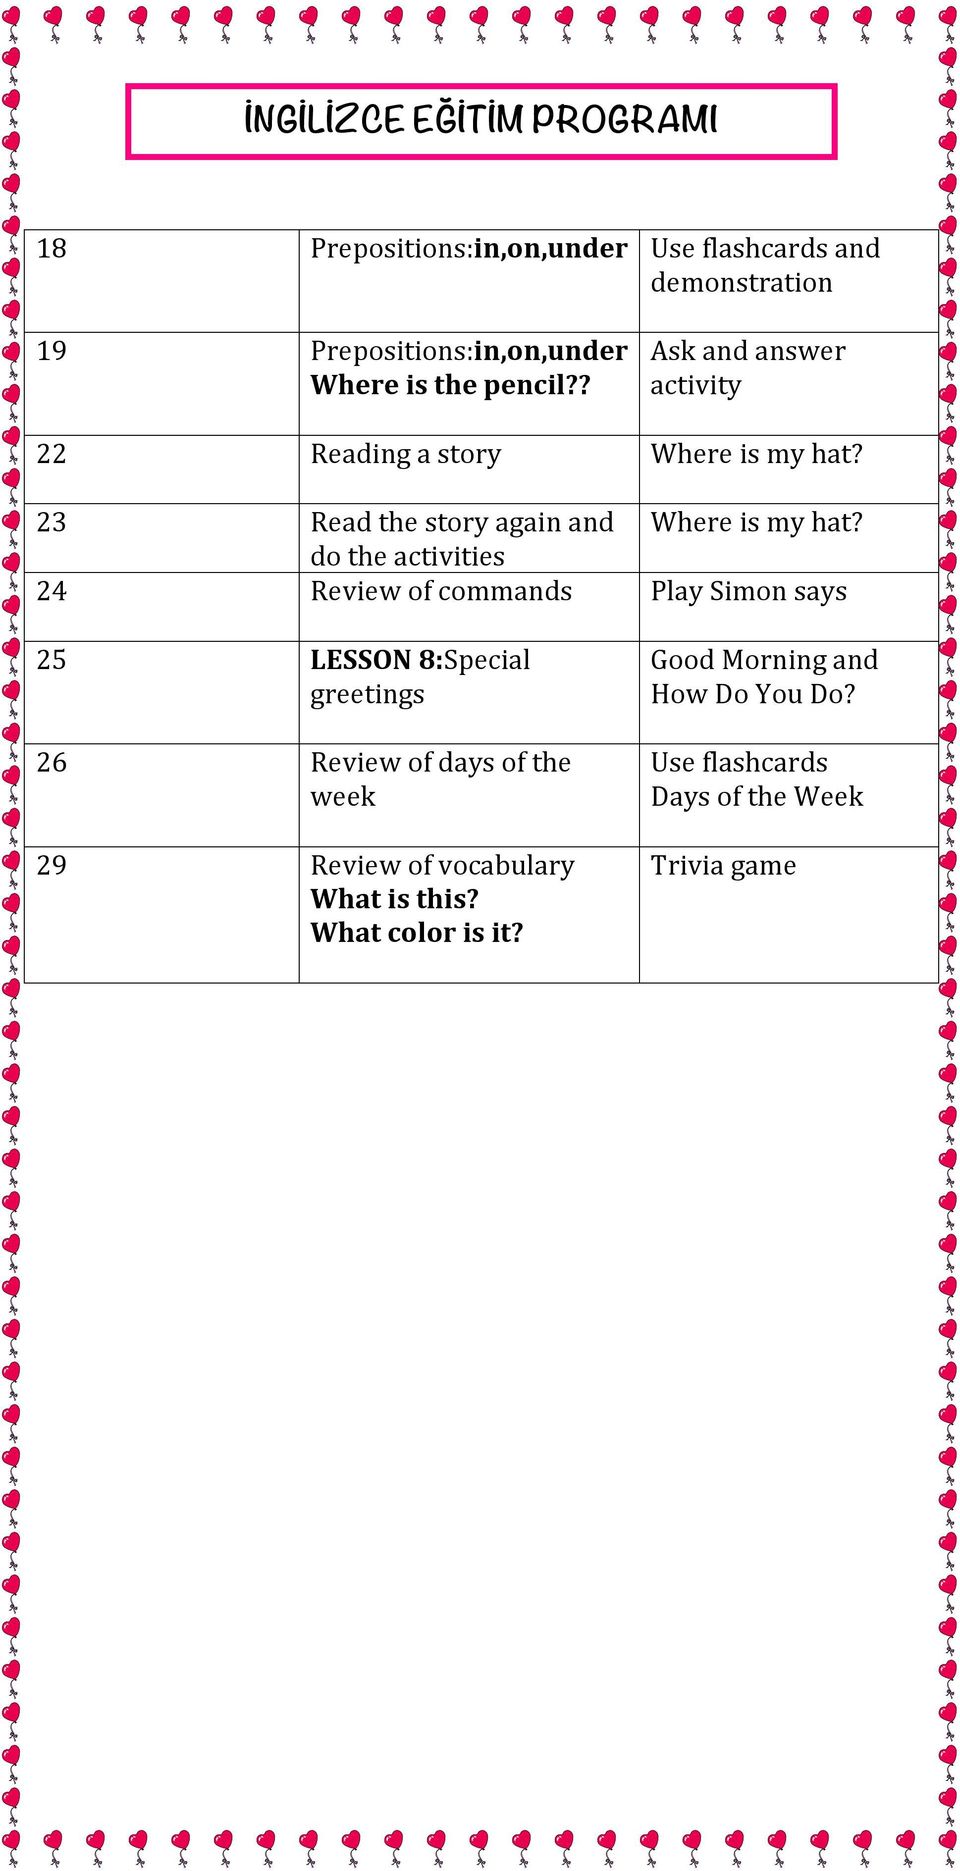 do the activities 24 Review of commands Play Simon says 25 LESSON 8:Special greetings 26 Review of days of the week 29